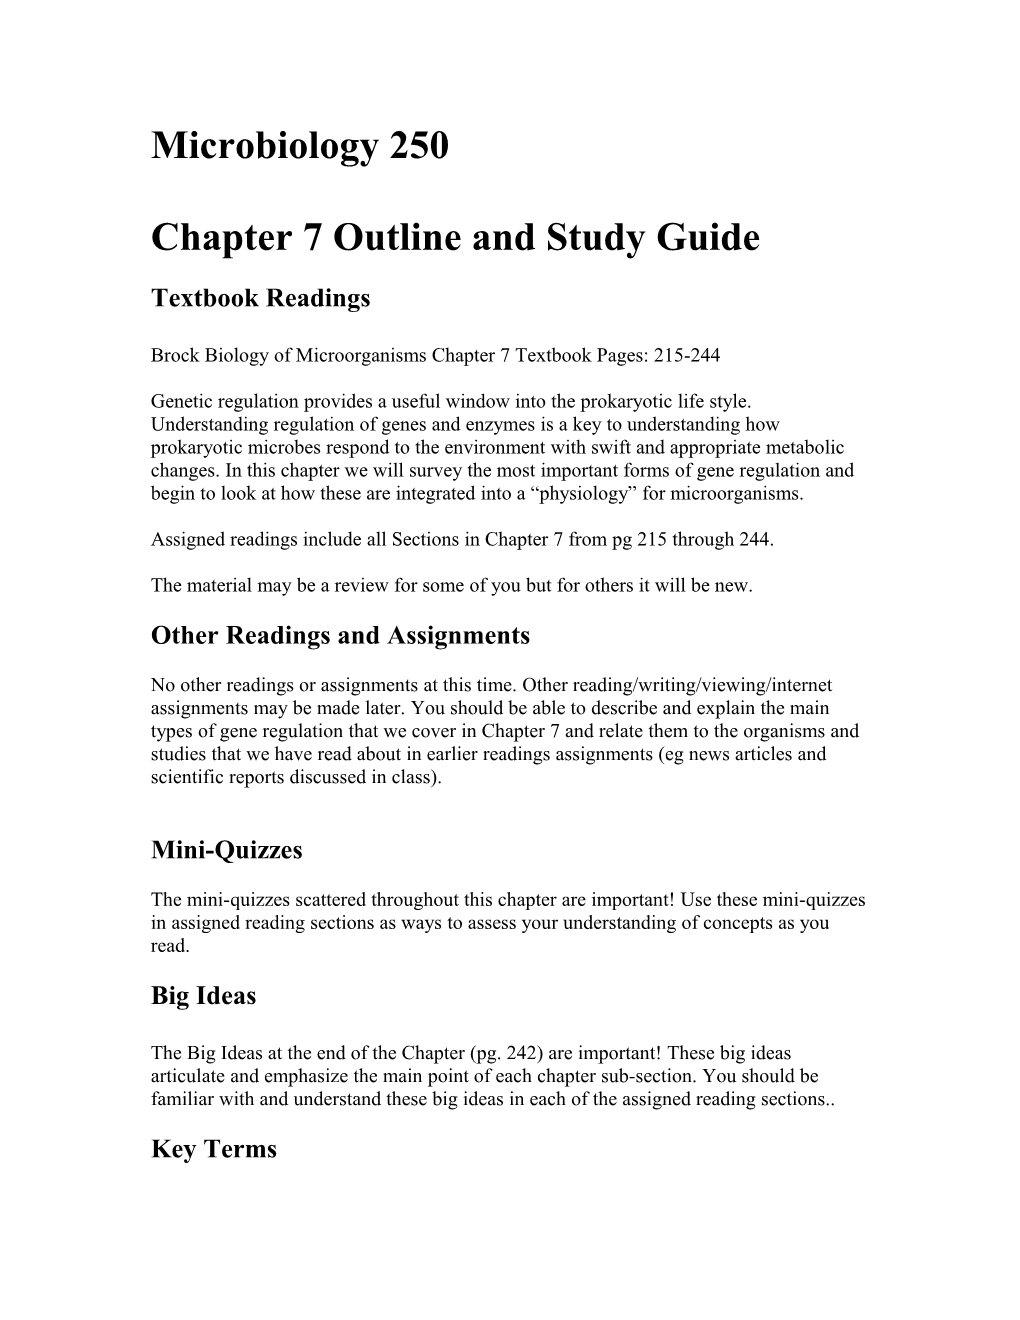 Chapter 7 Outline and Study Guide